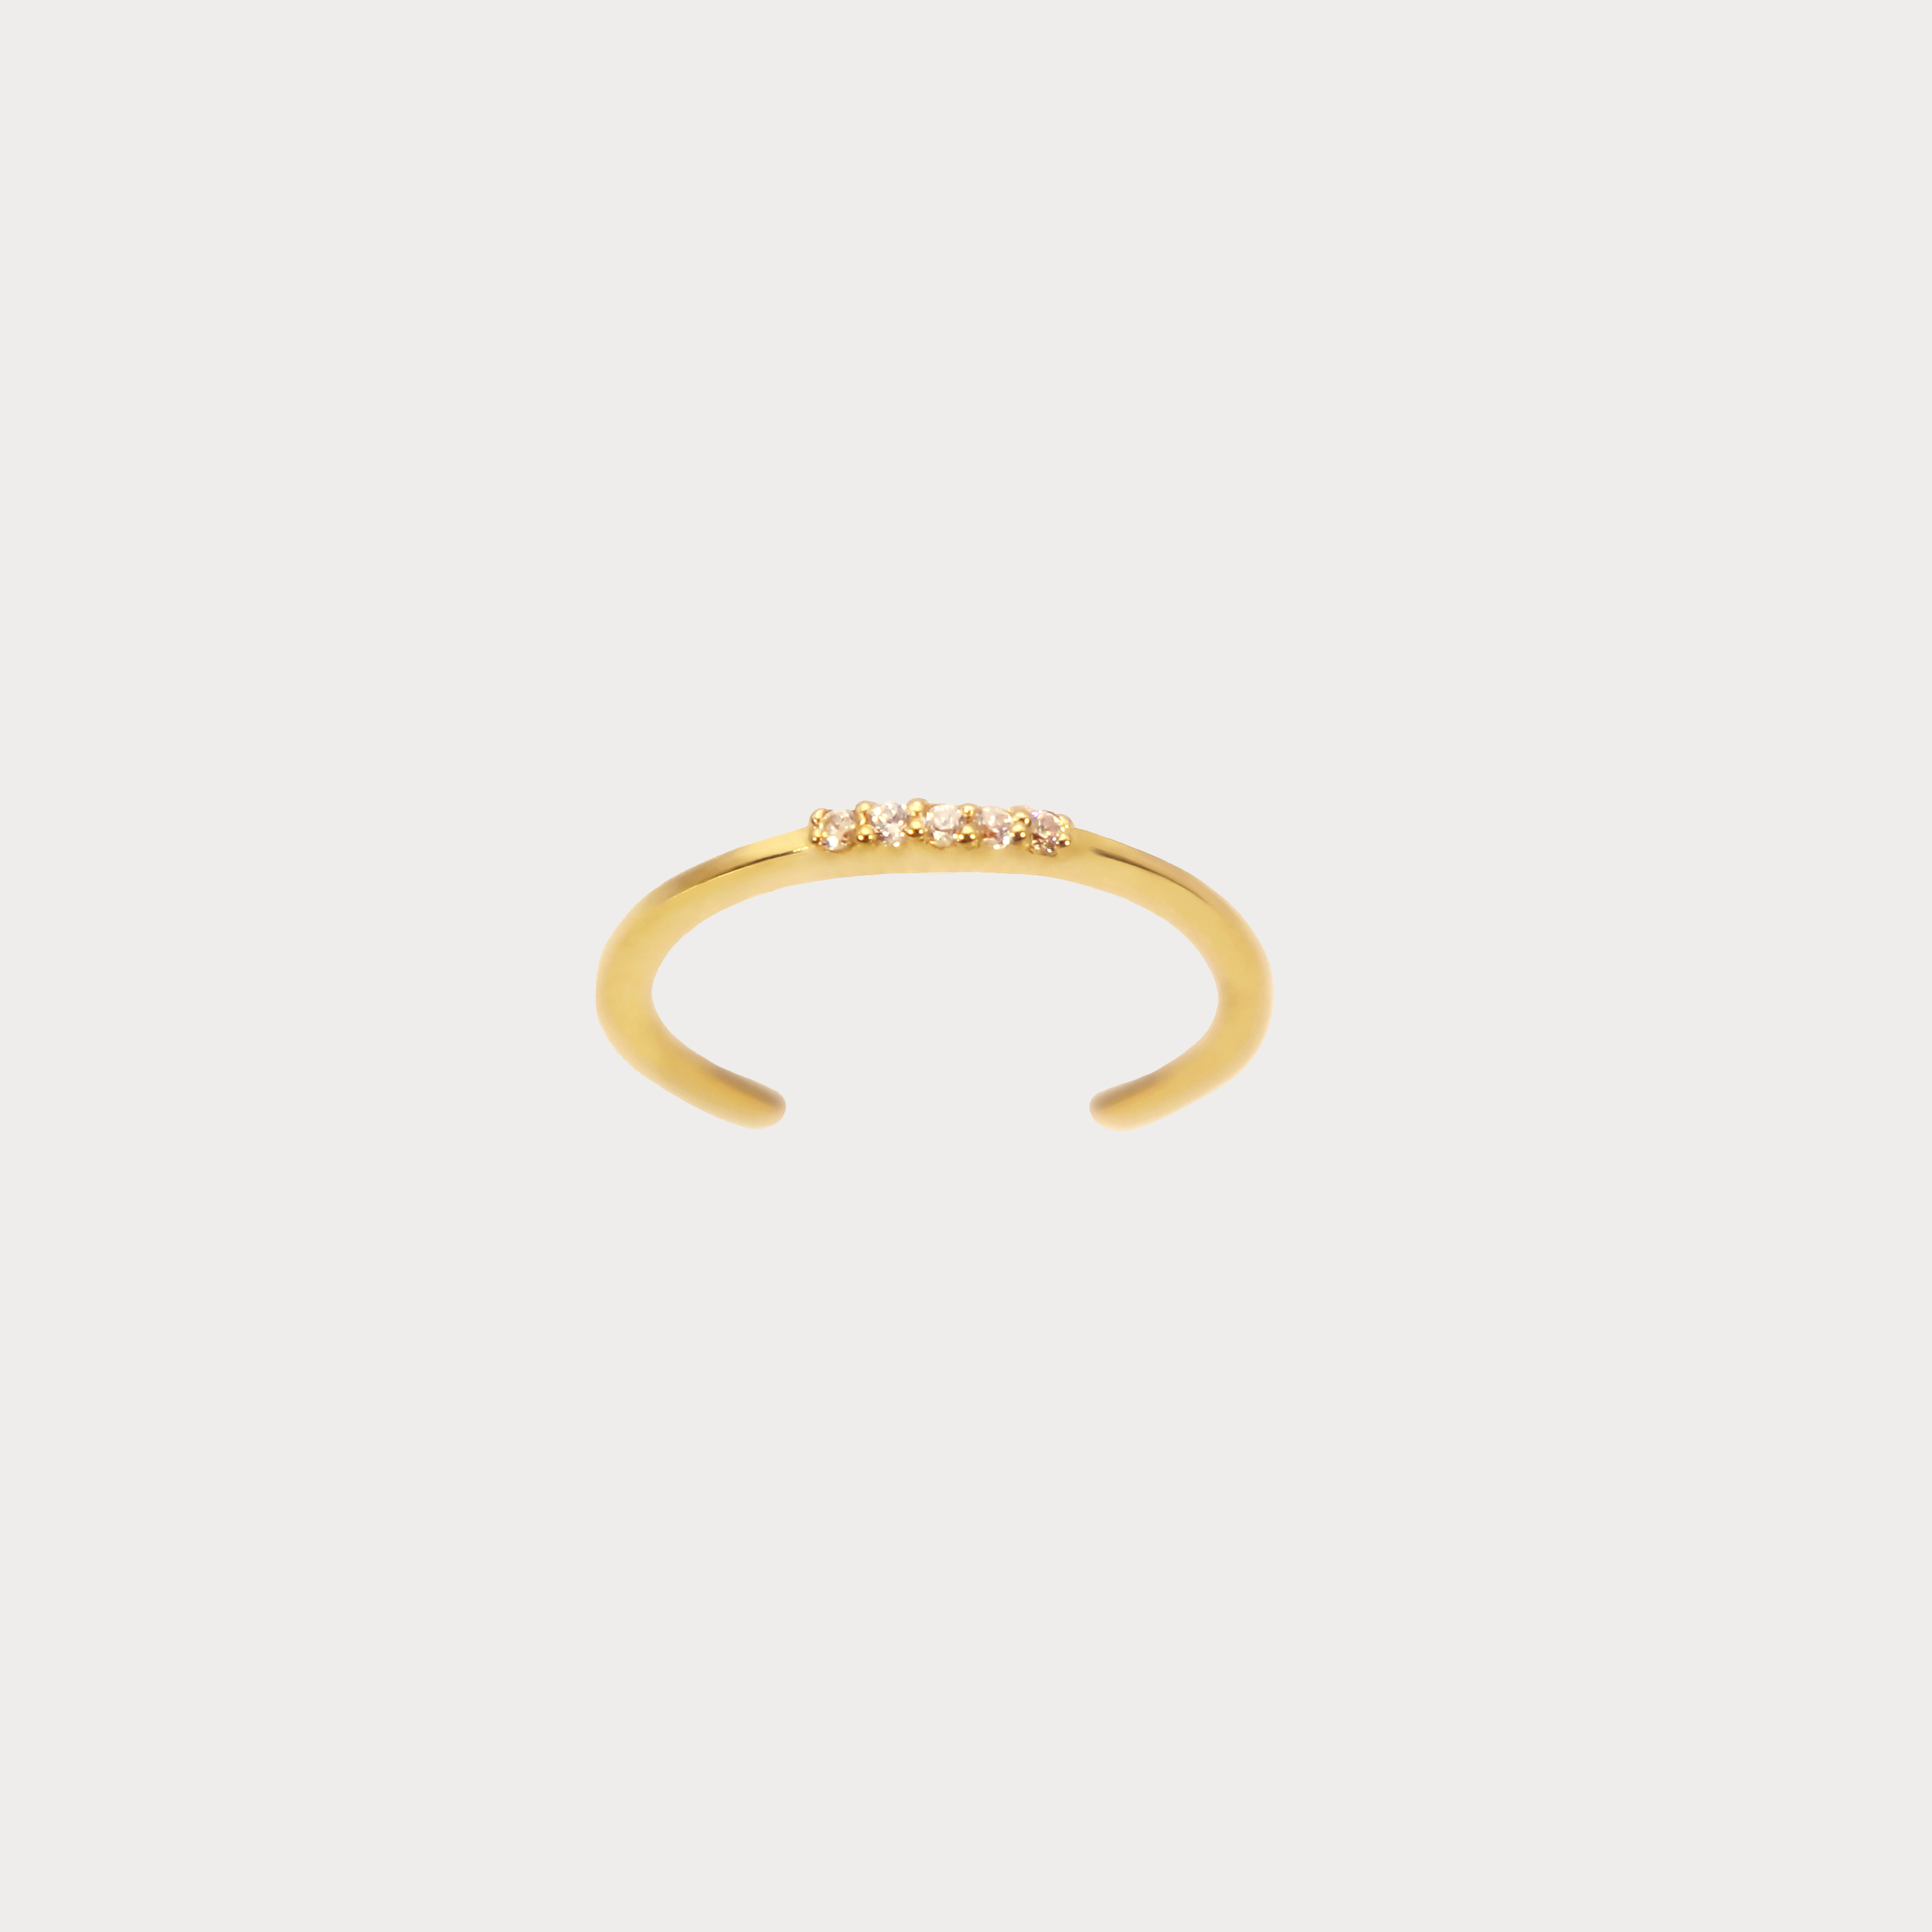 14K Gold Five Line Ring BlackSugar - Best Online Jewelry Shop Earrings, Necklaces, Rings, Located West Los Angele